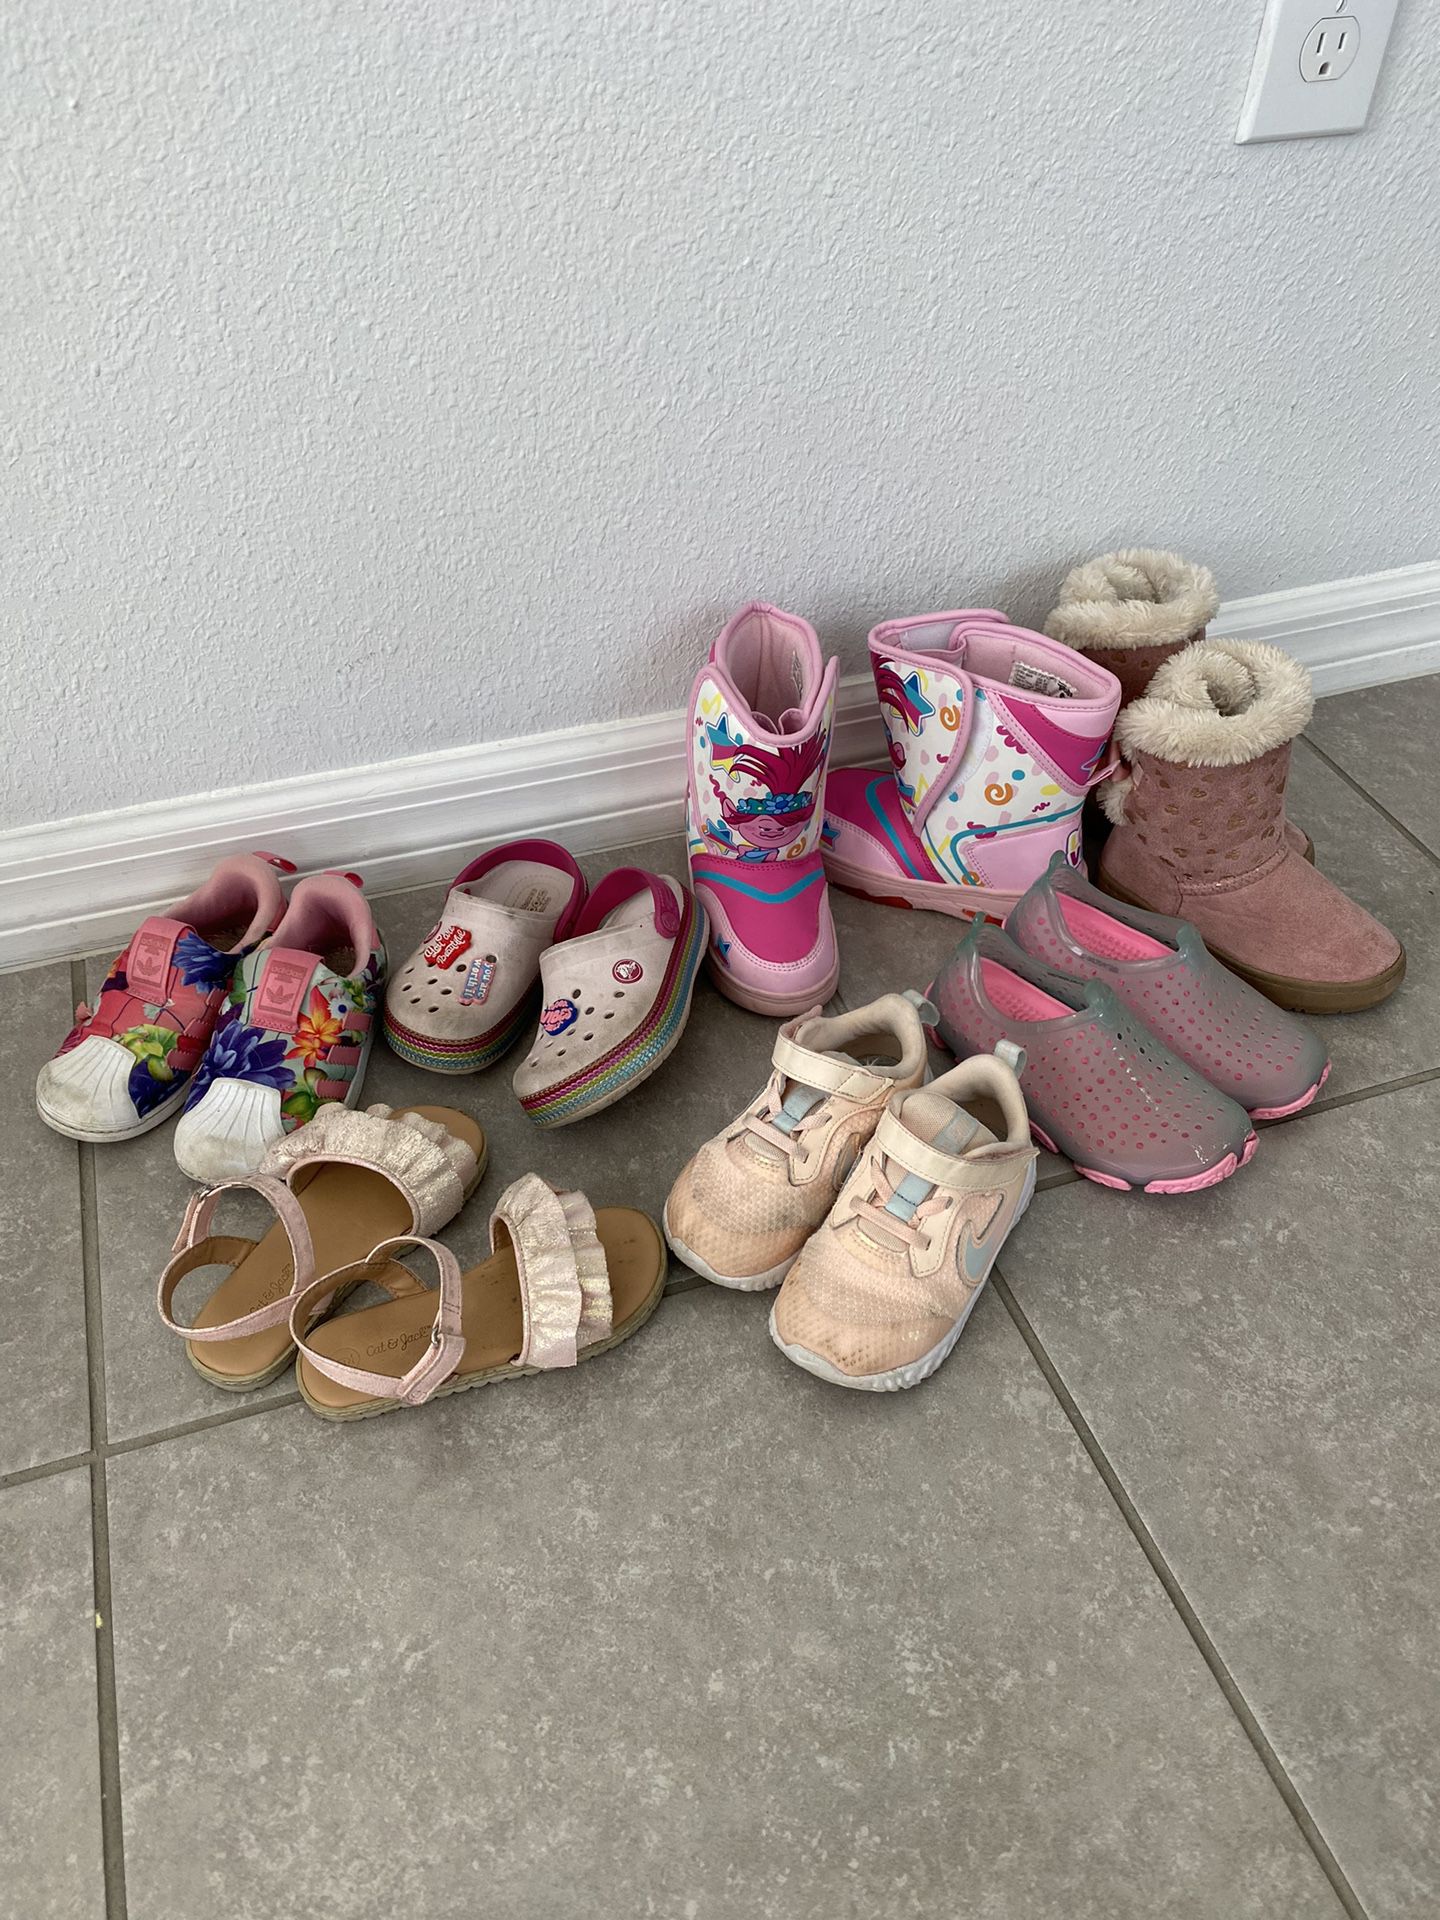 7 pairs size 9 bundle girl shoes, snow boots trolls, crocs, addidas shoes sneakers $40